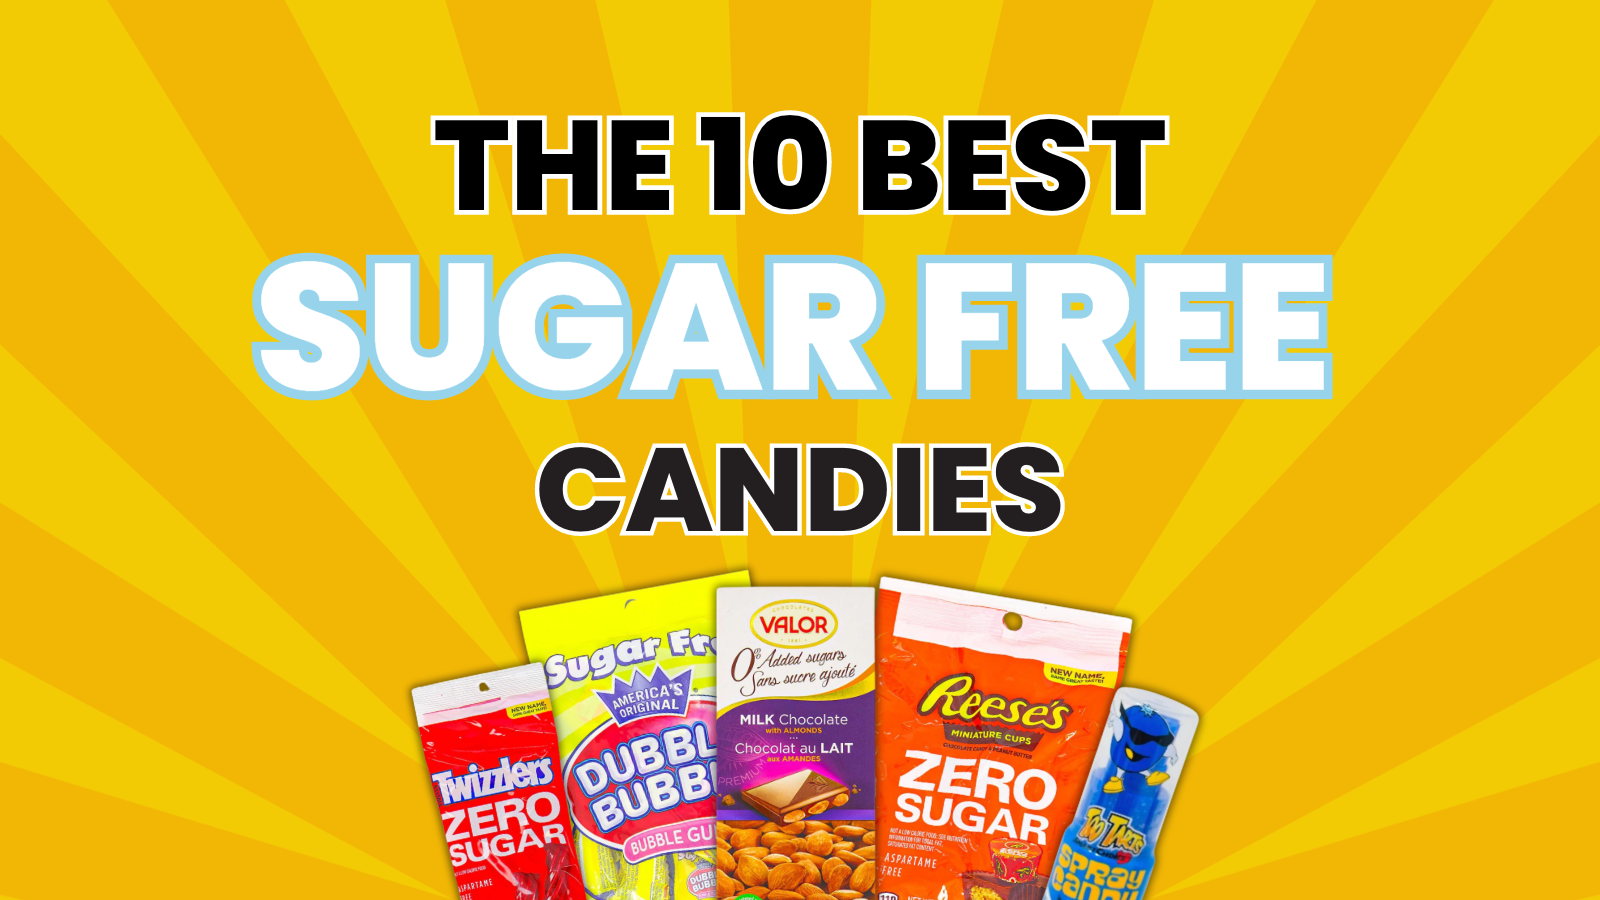 Our Top 10 Best Sugar Free Candy